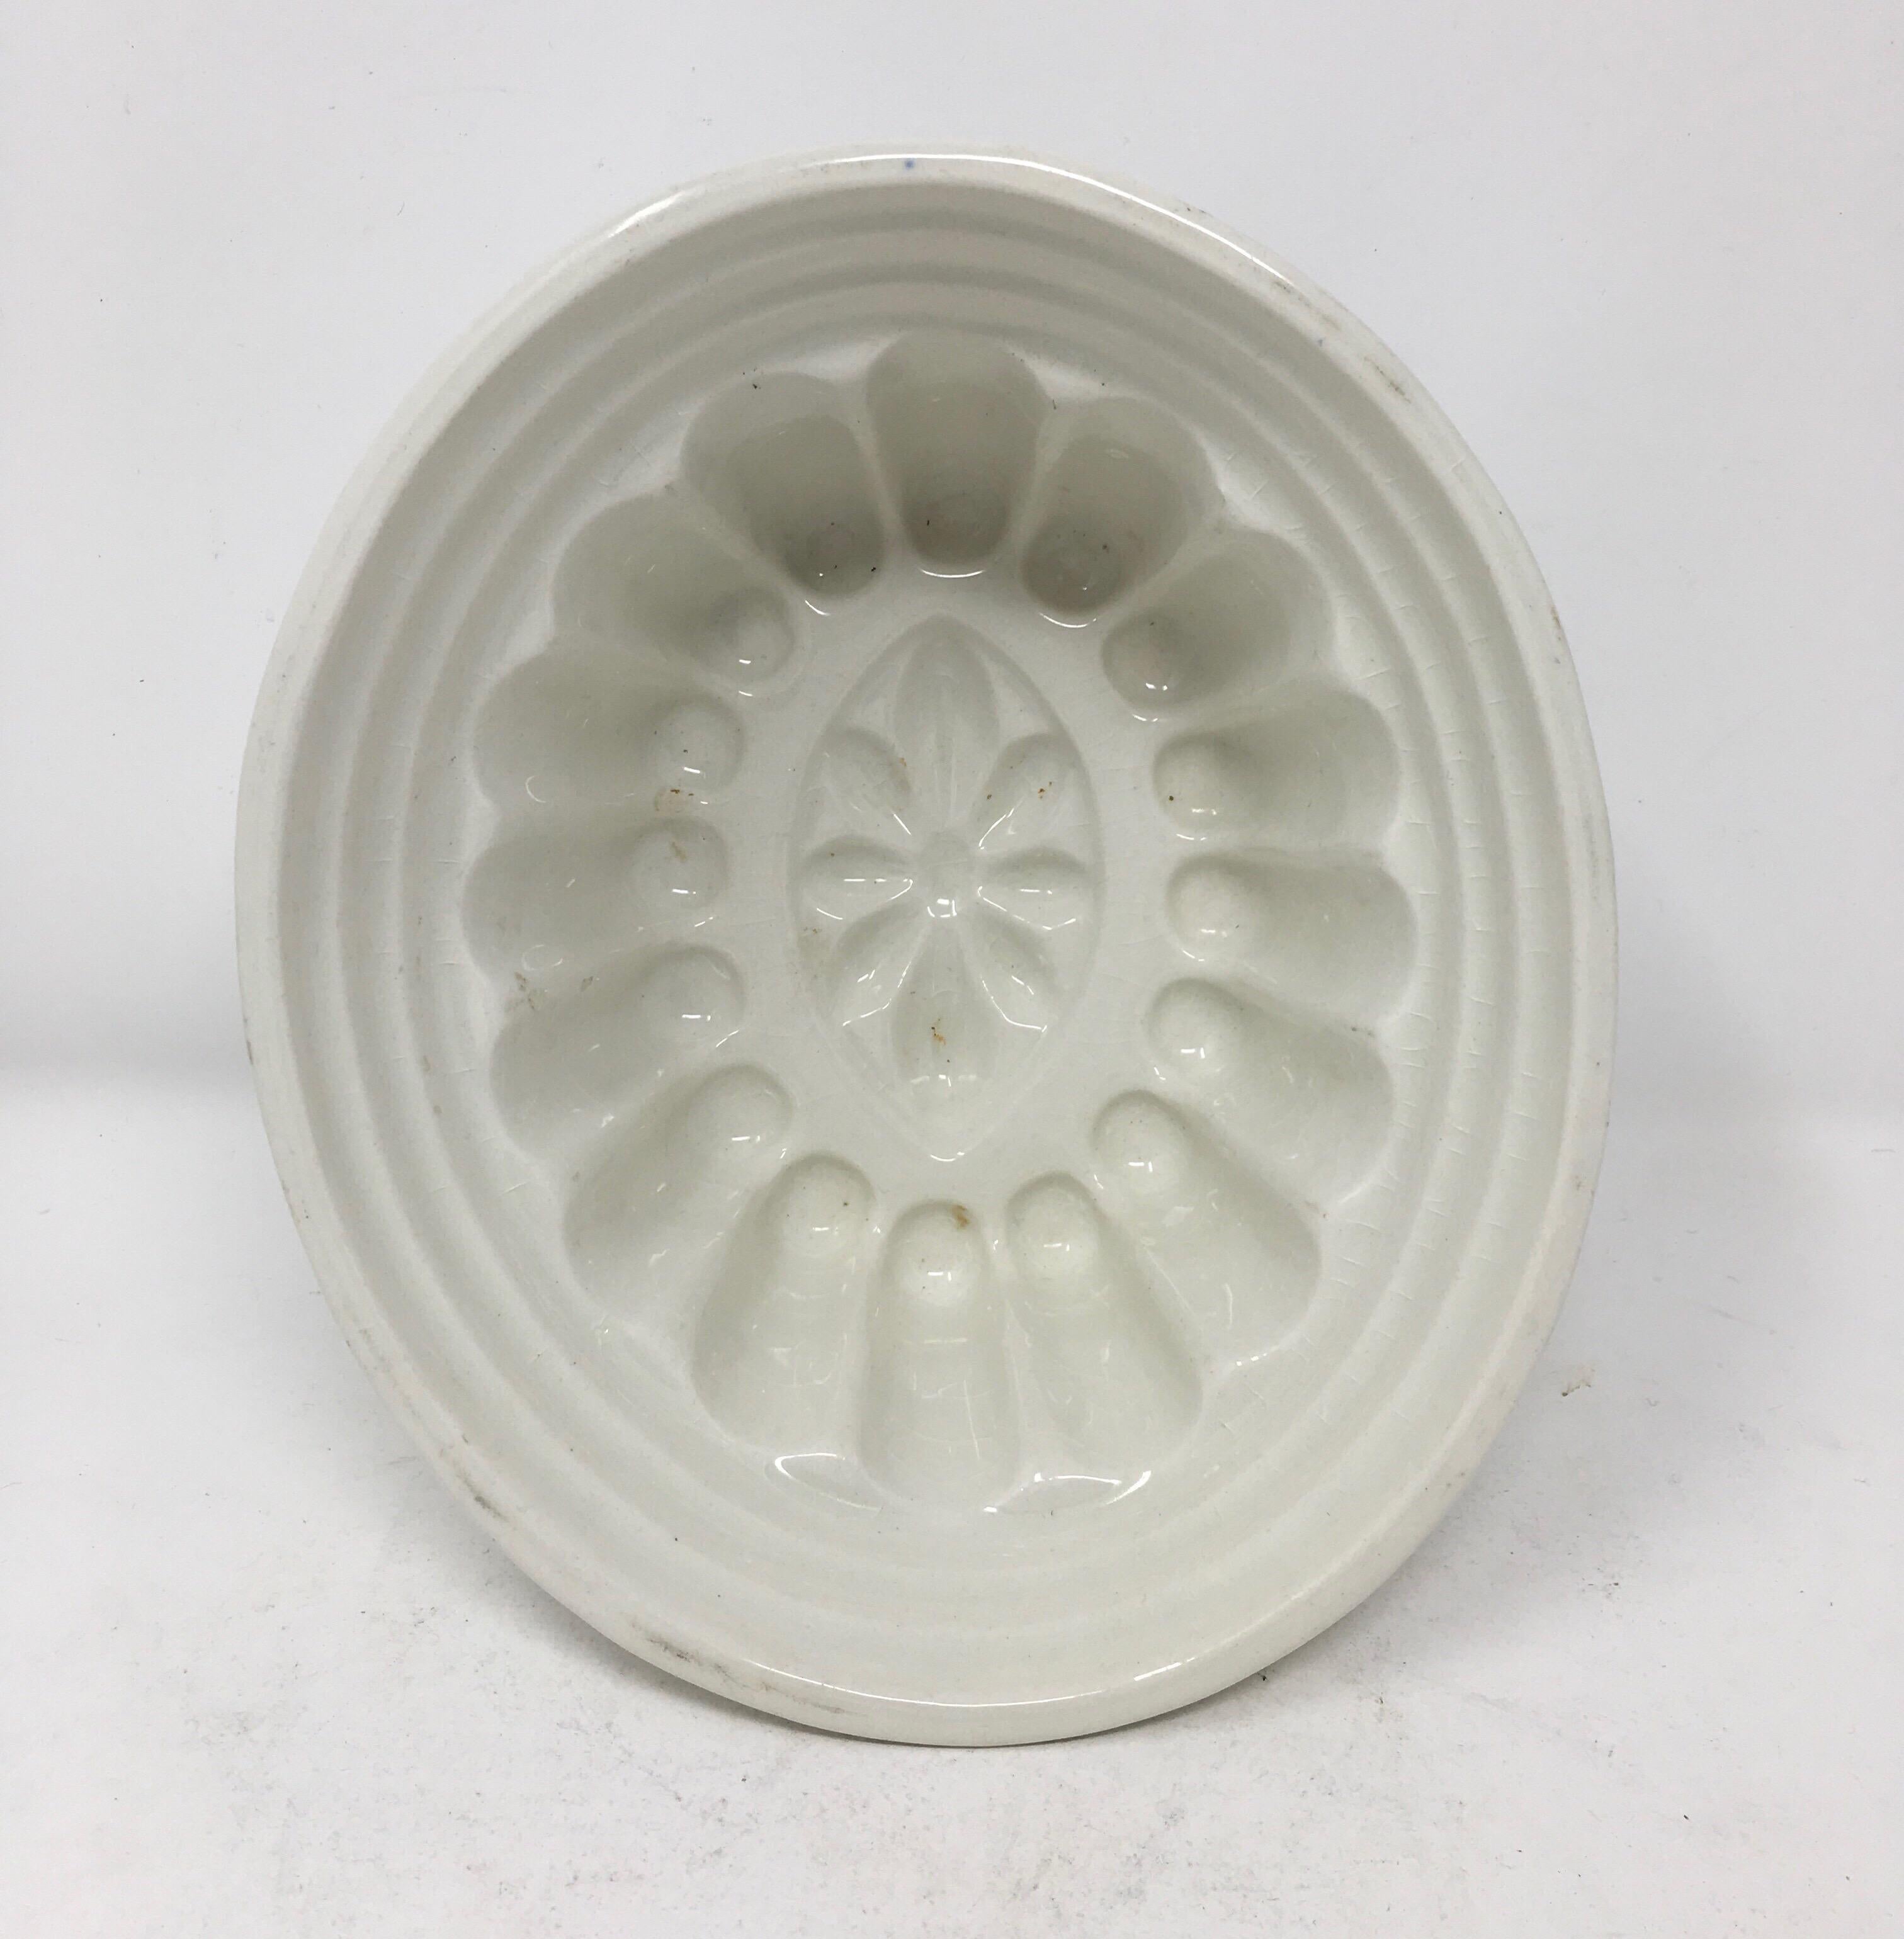 This Victorian Ironstone Mold with a charming floral motif, was used to mold several different food items such as jellies, aspic, meat and puddings into beautiful shapes served on a platter. The ornate pattern within the bowl would appear on the